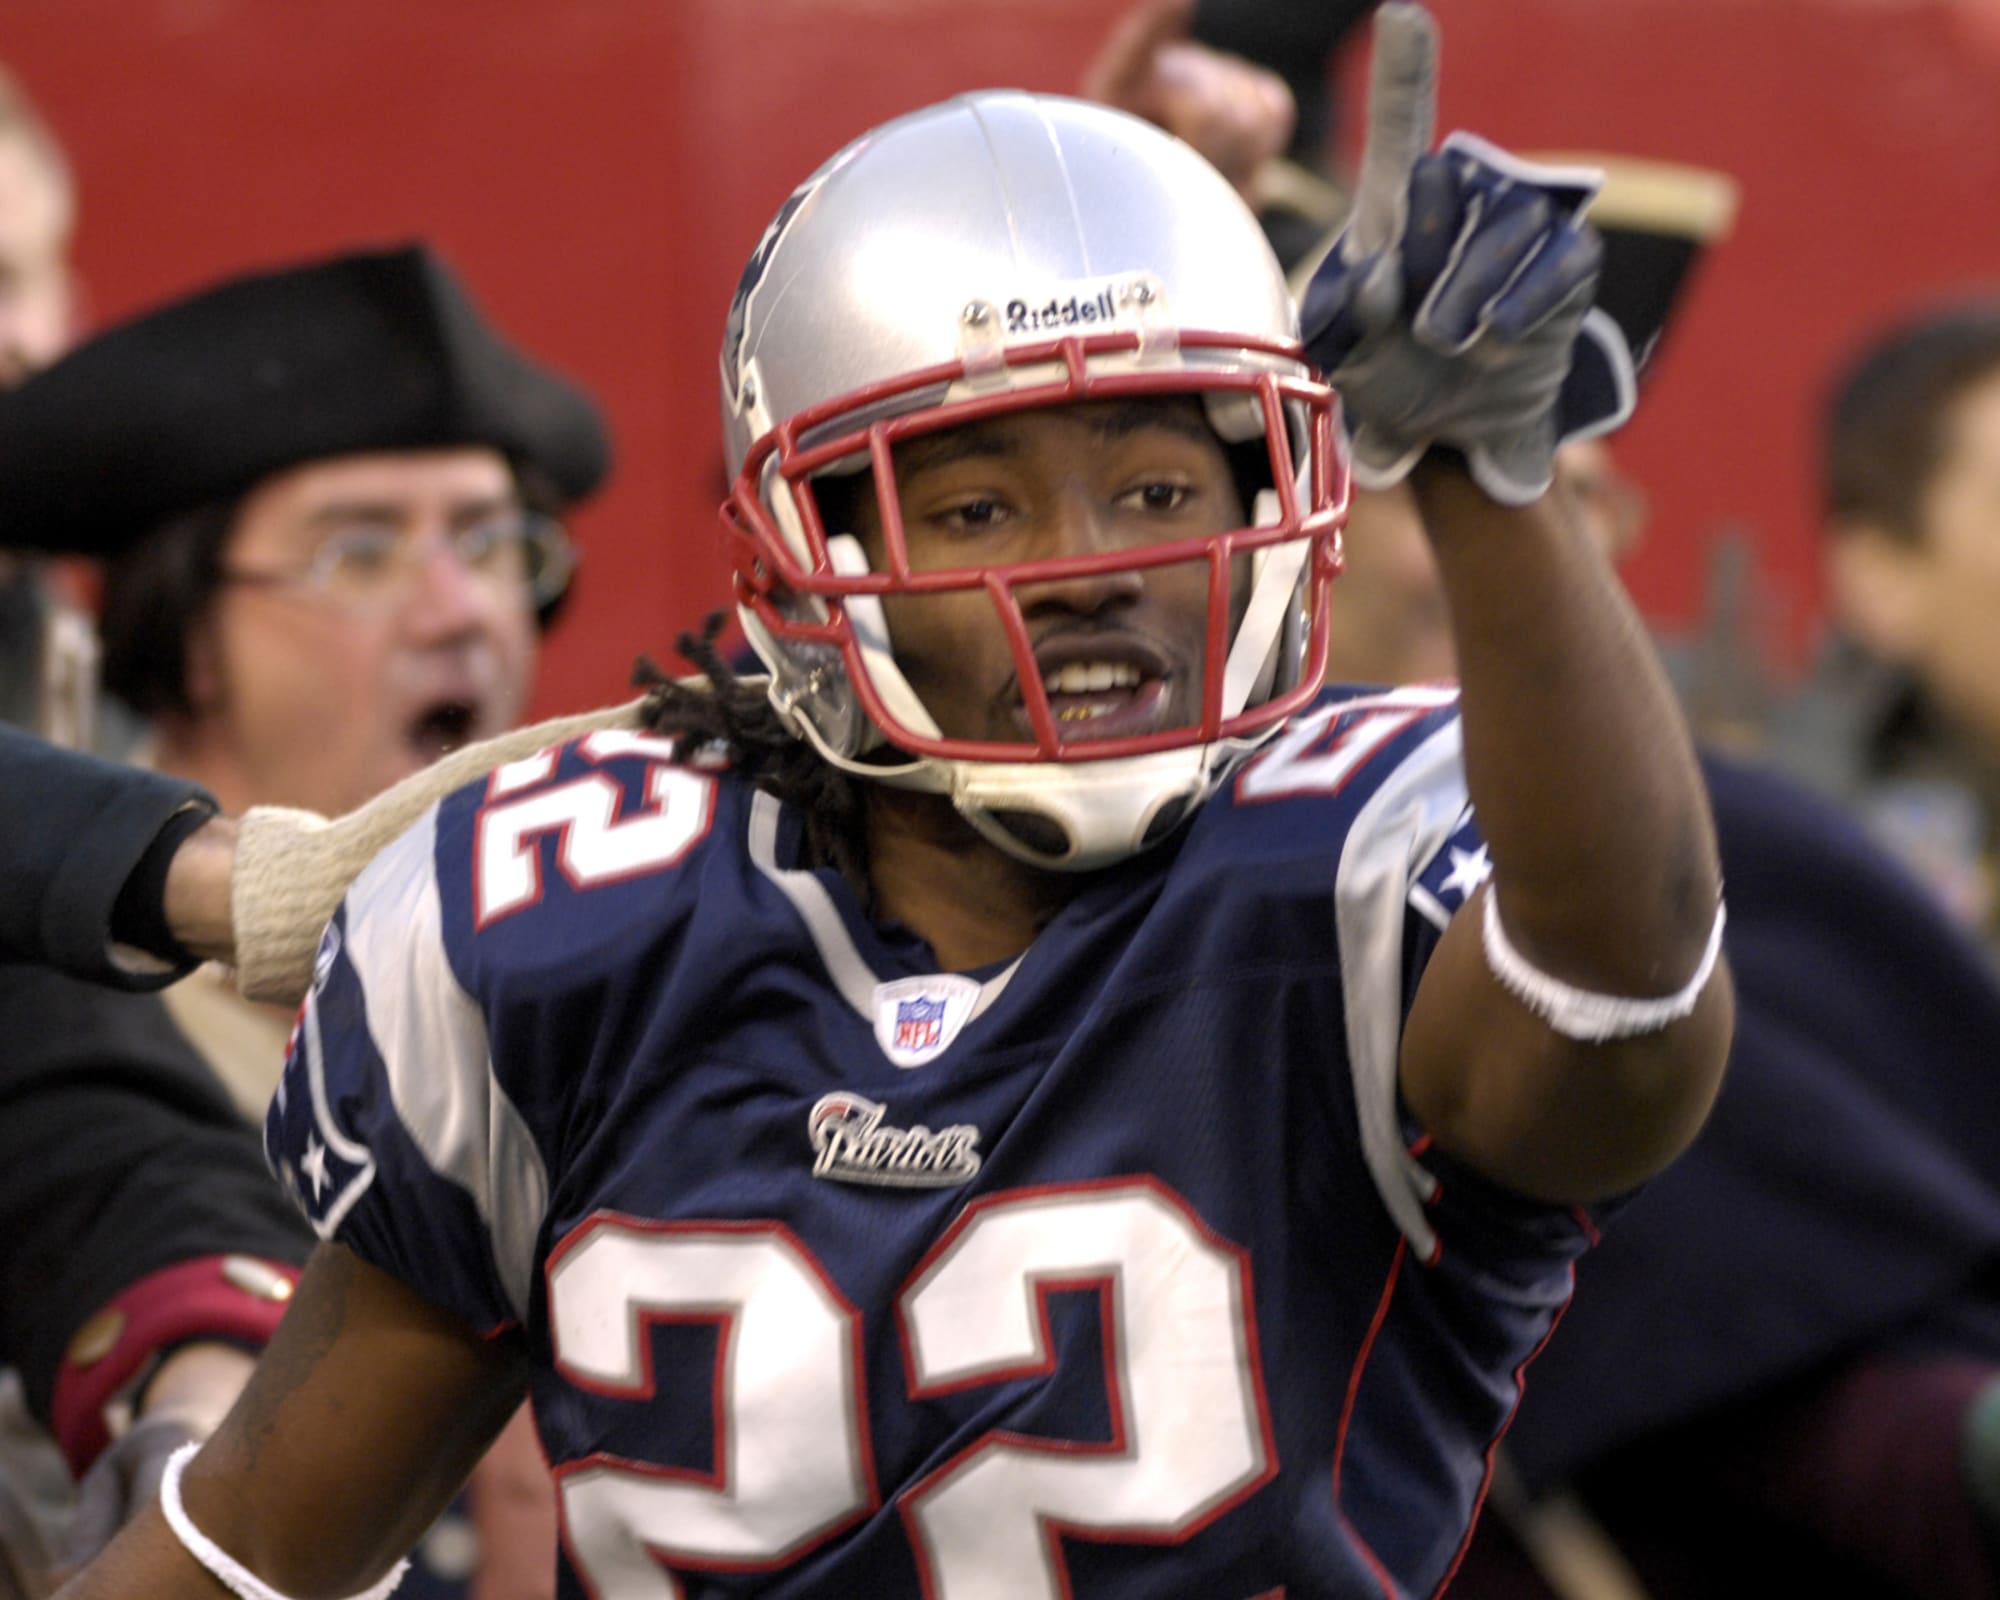 Asante Samuel’s feud with the Patriots, Bill Belichick is escalating